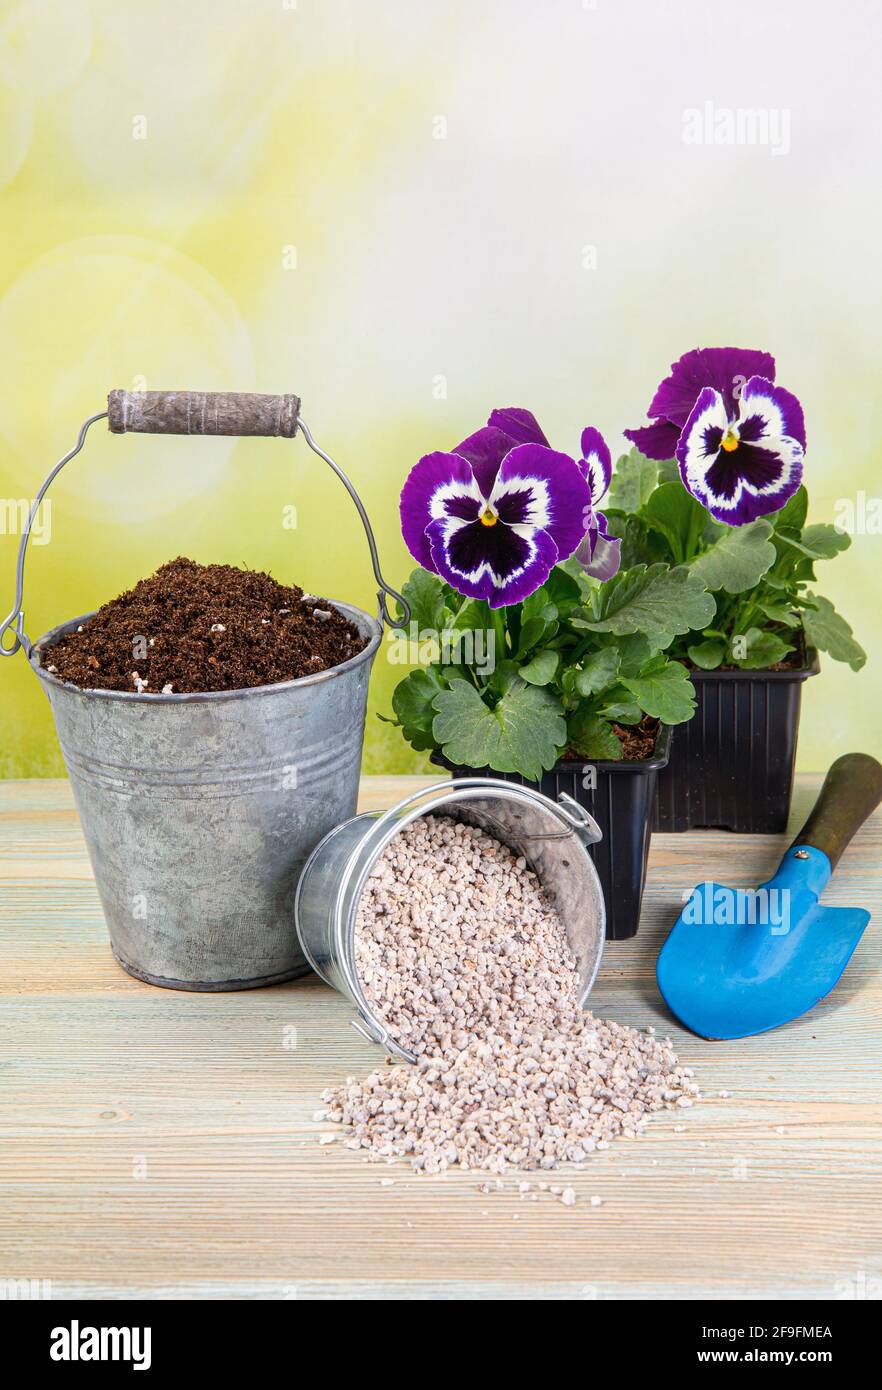 Mixing perlite granules pellets with black gardening soil improves water retention, airflow, aeration, root growth capacity of all the plants growing. Stock Photo